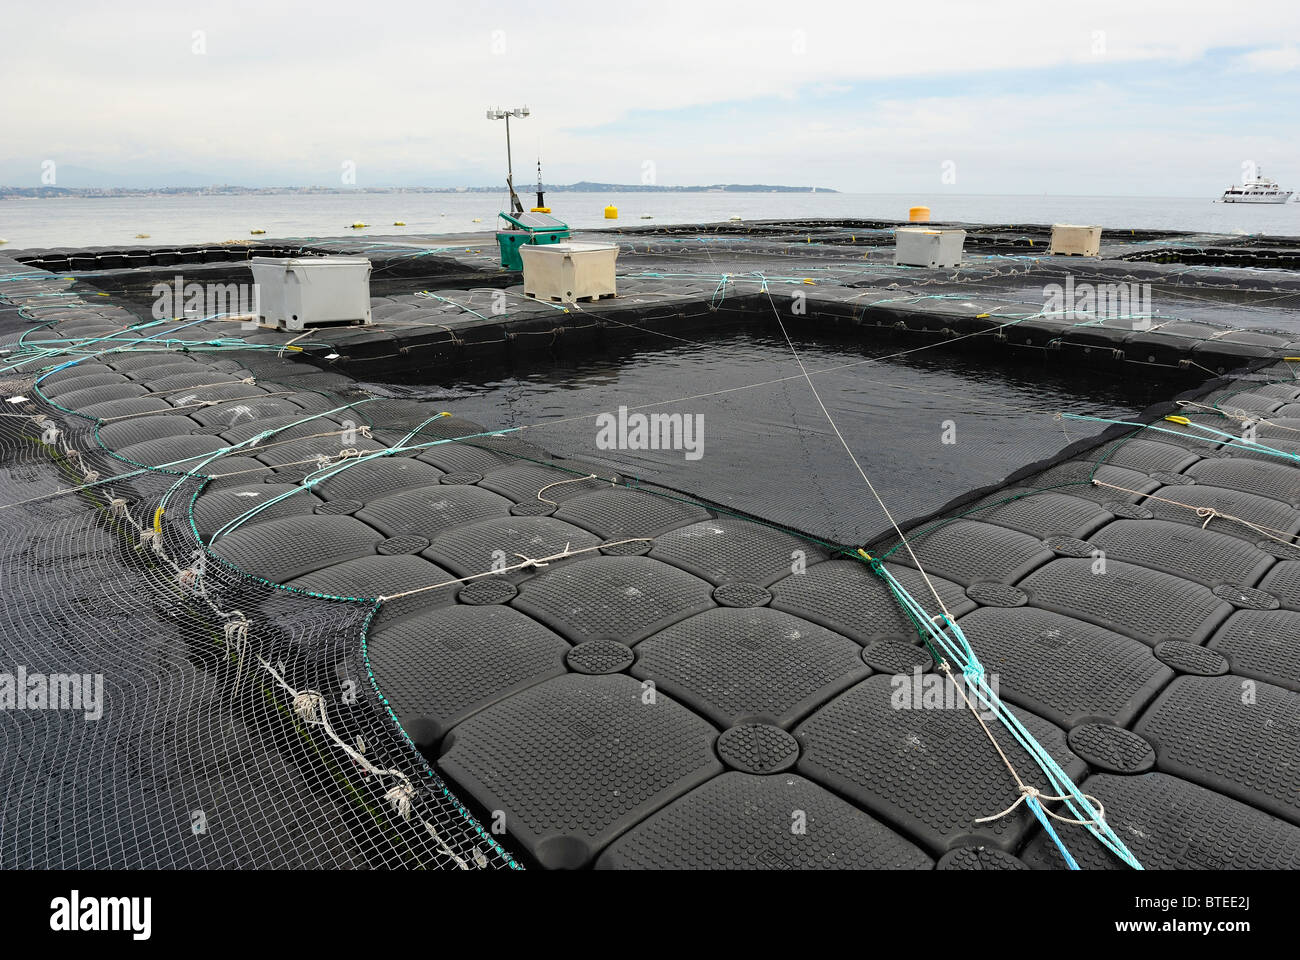 Entry of a cage of an organic fish farming in the Mediterranean Sea Stock Photo